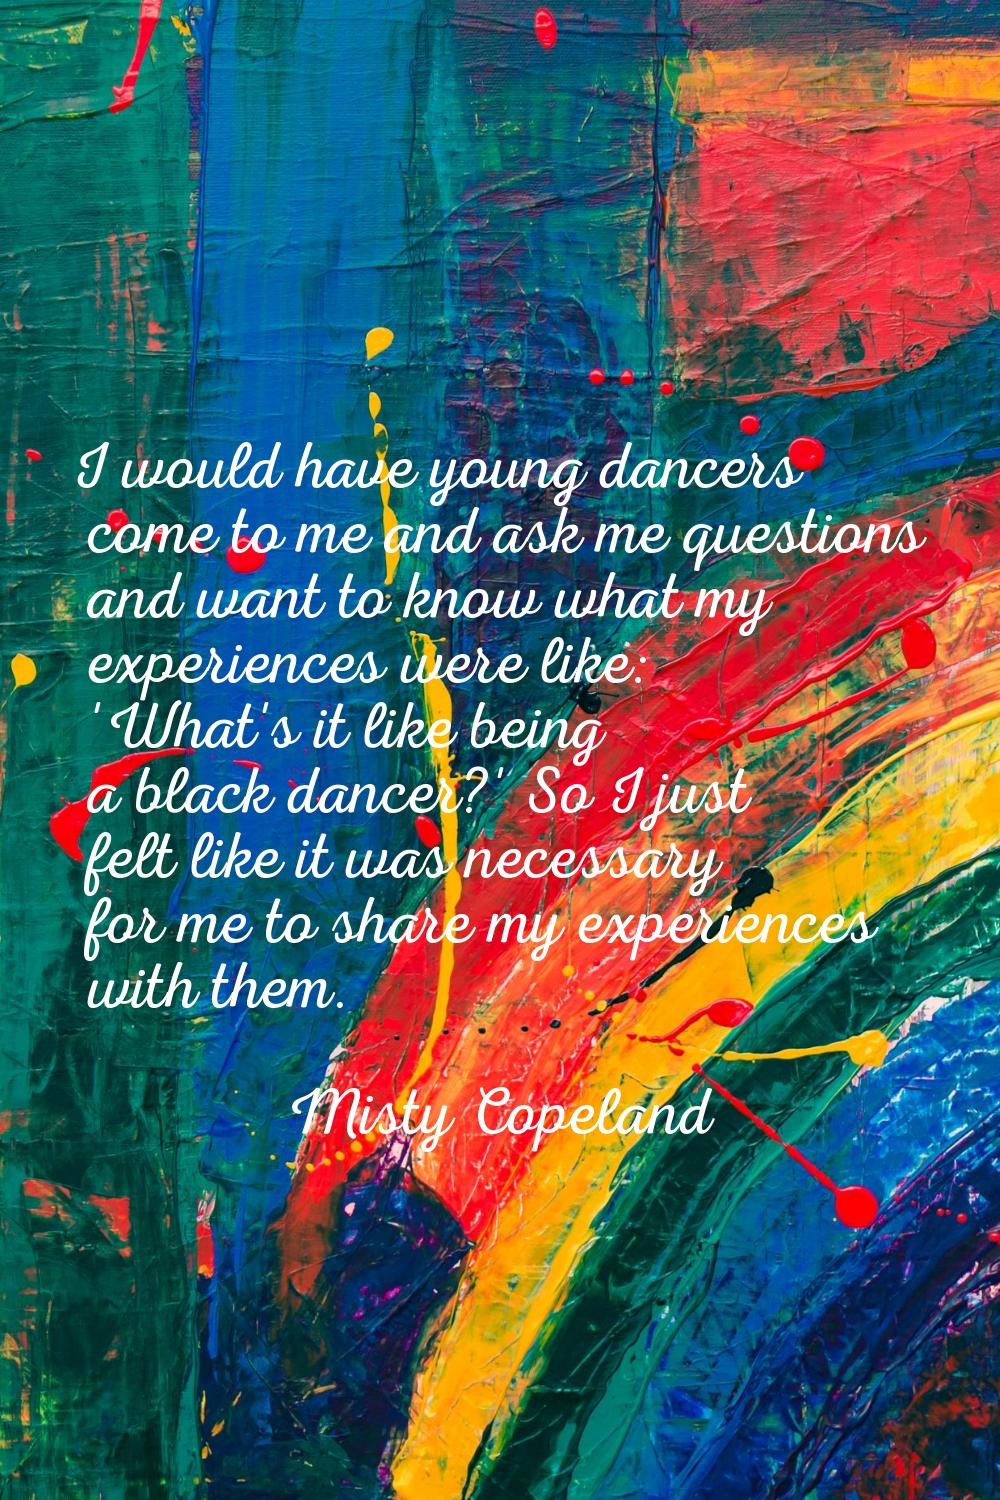 I would have young dancers come to me and ask me questions and want to know what my experiences wer